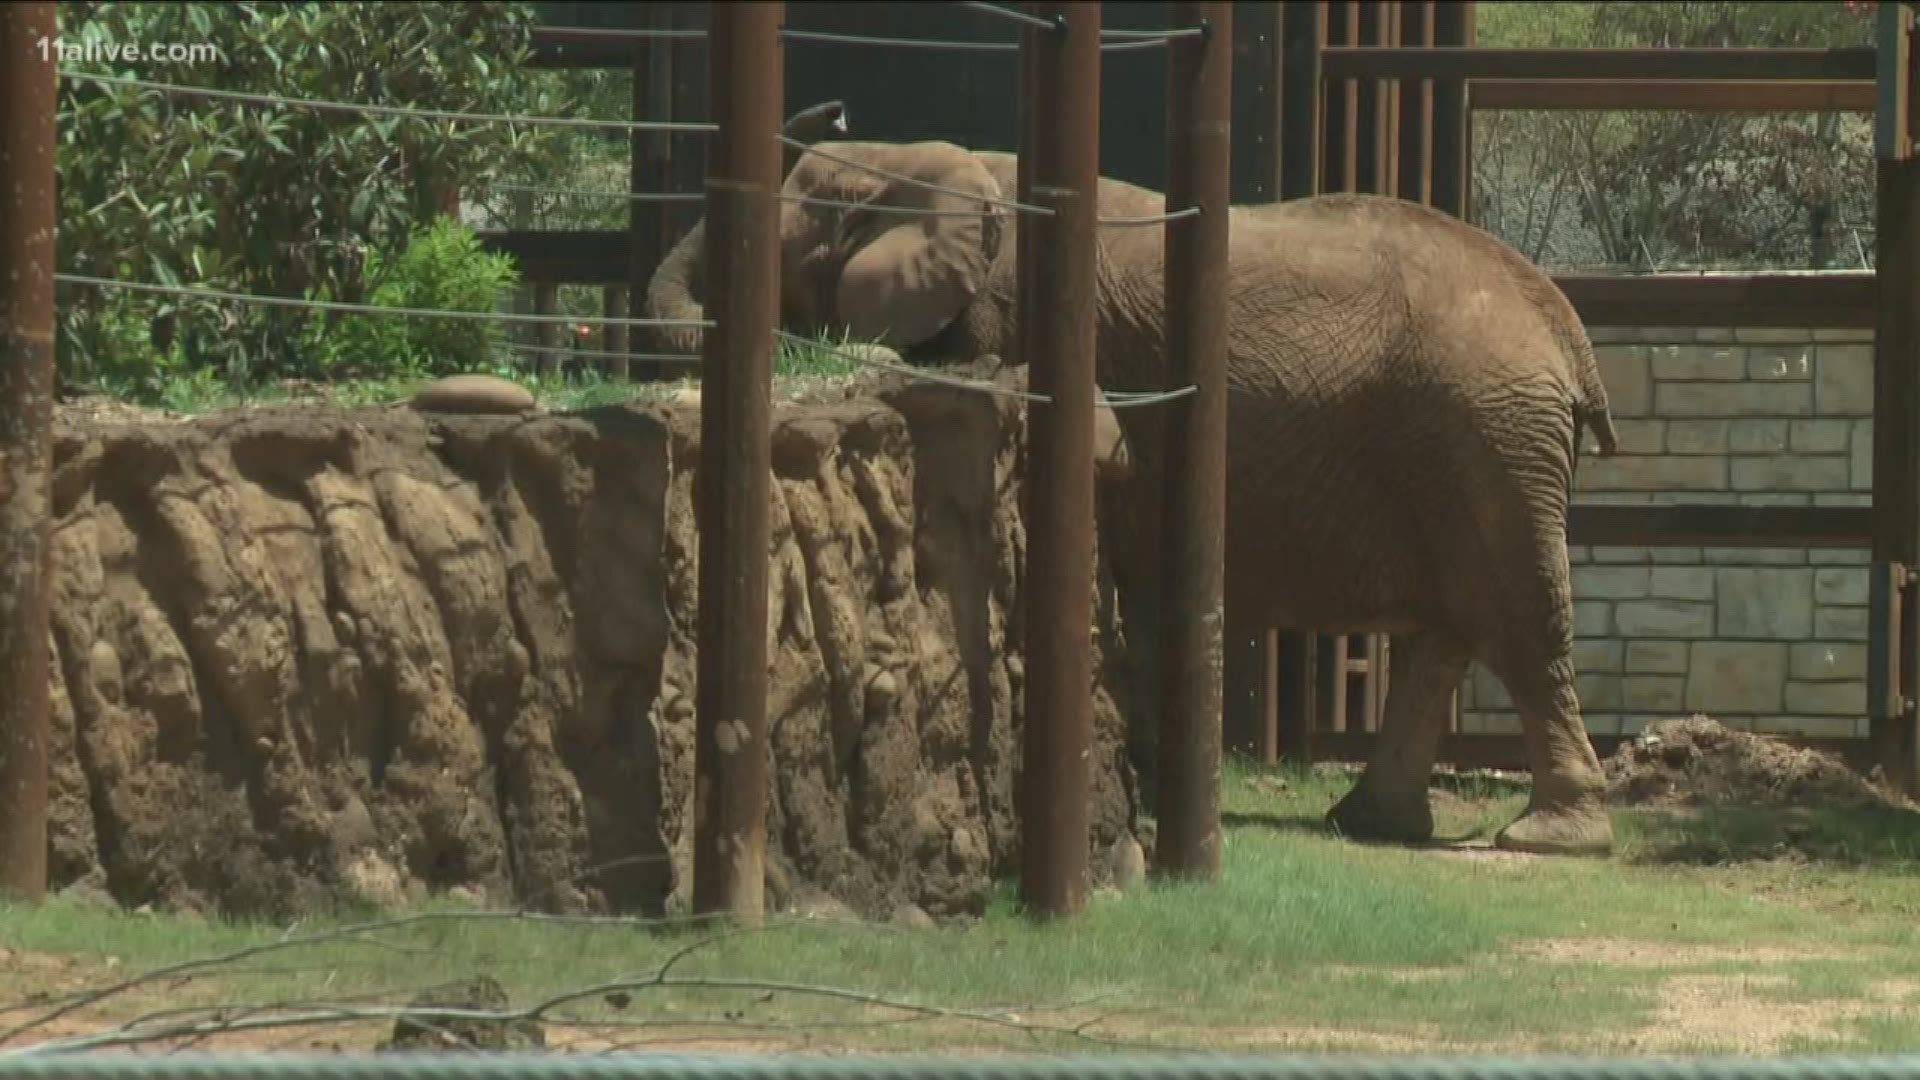 The zoo's African elephants will also be part of the exhibit.